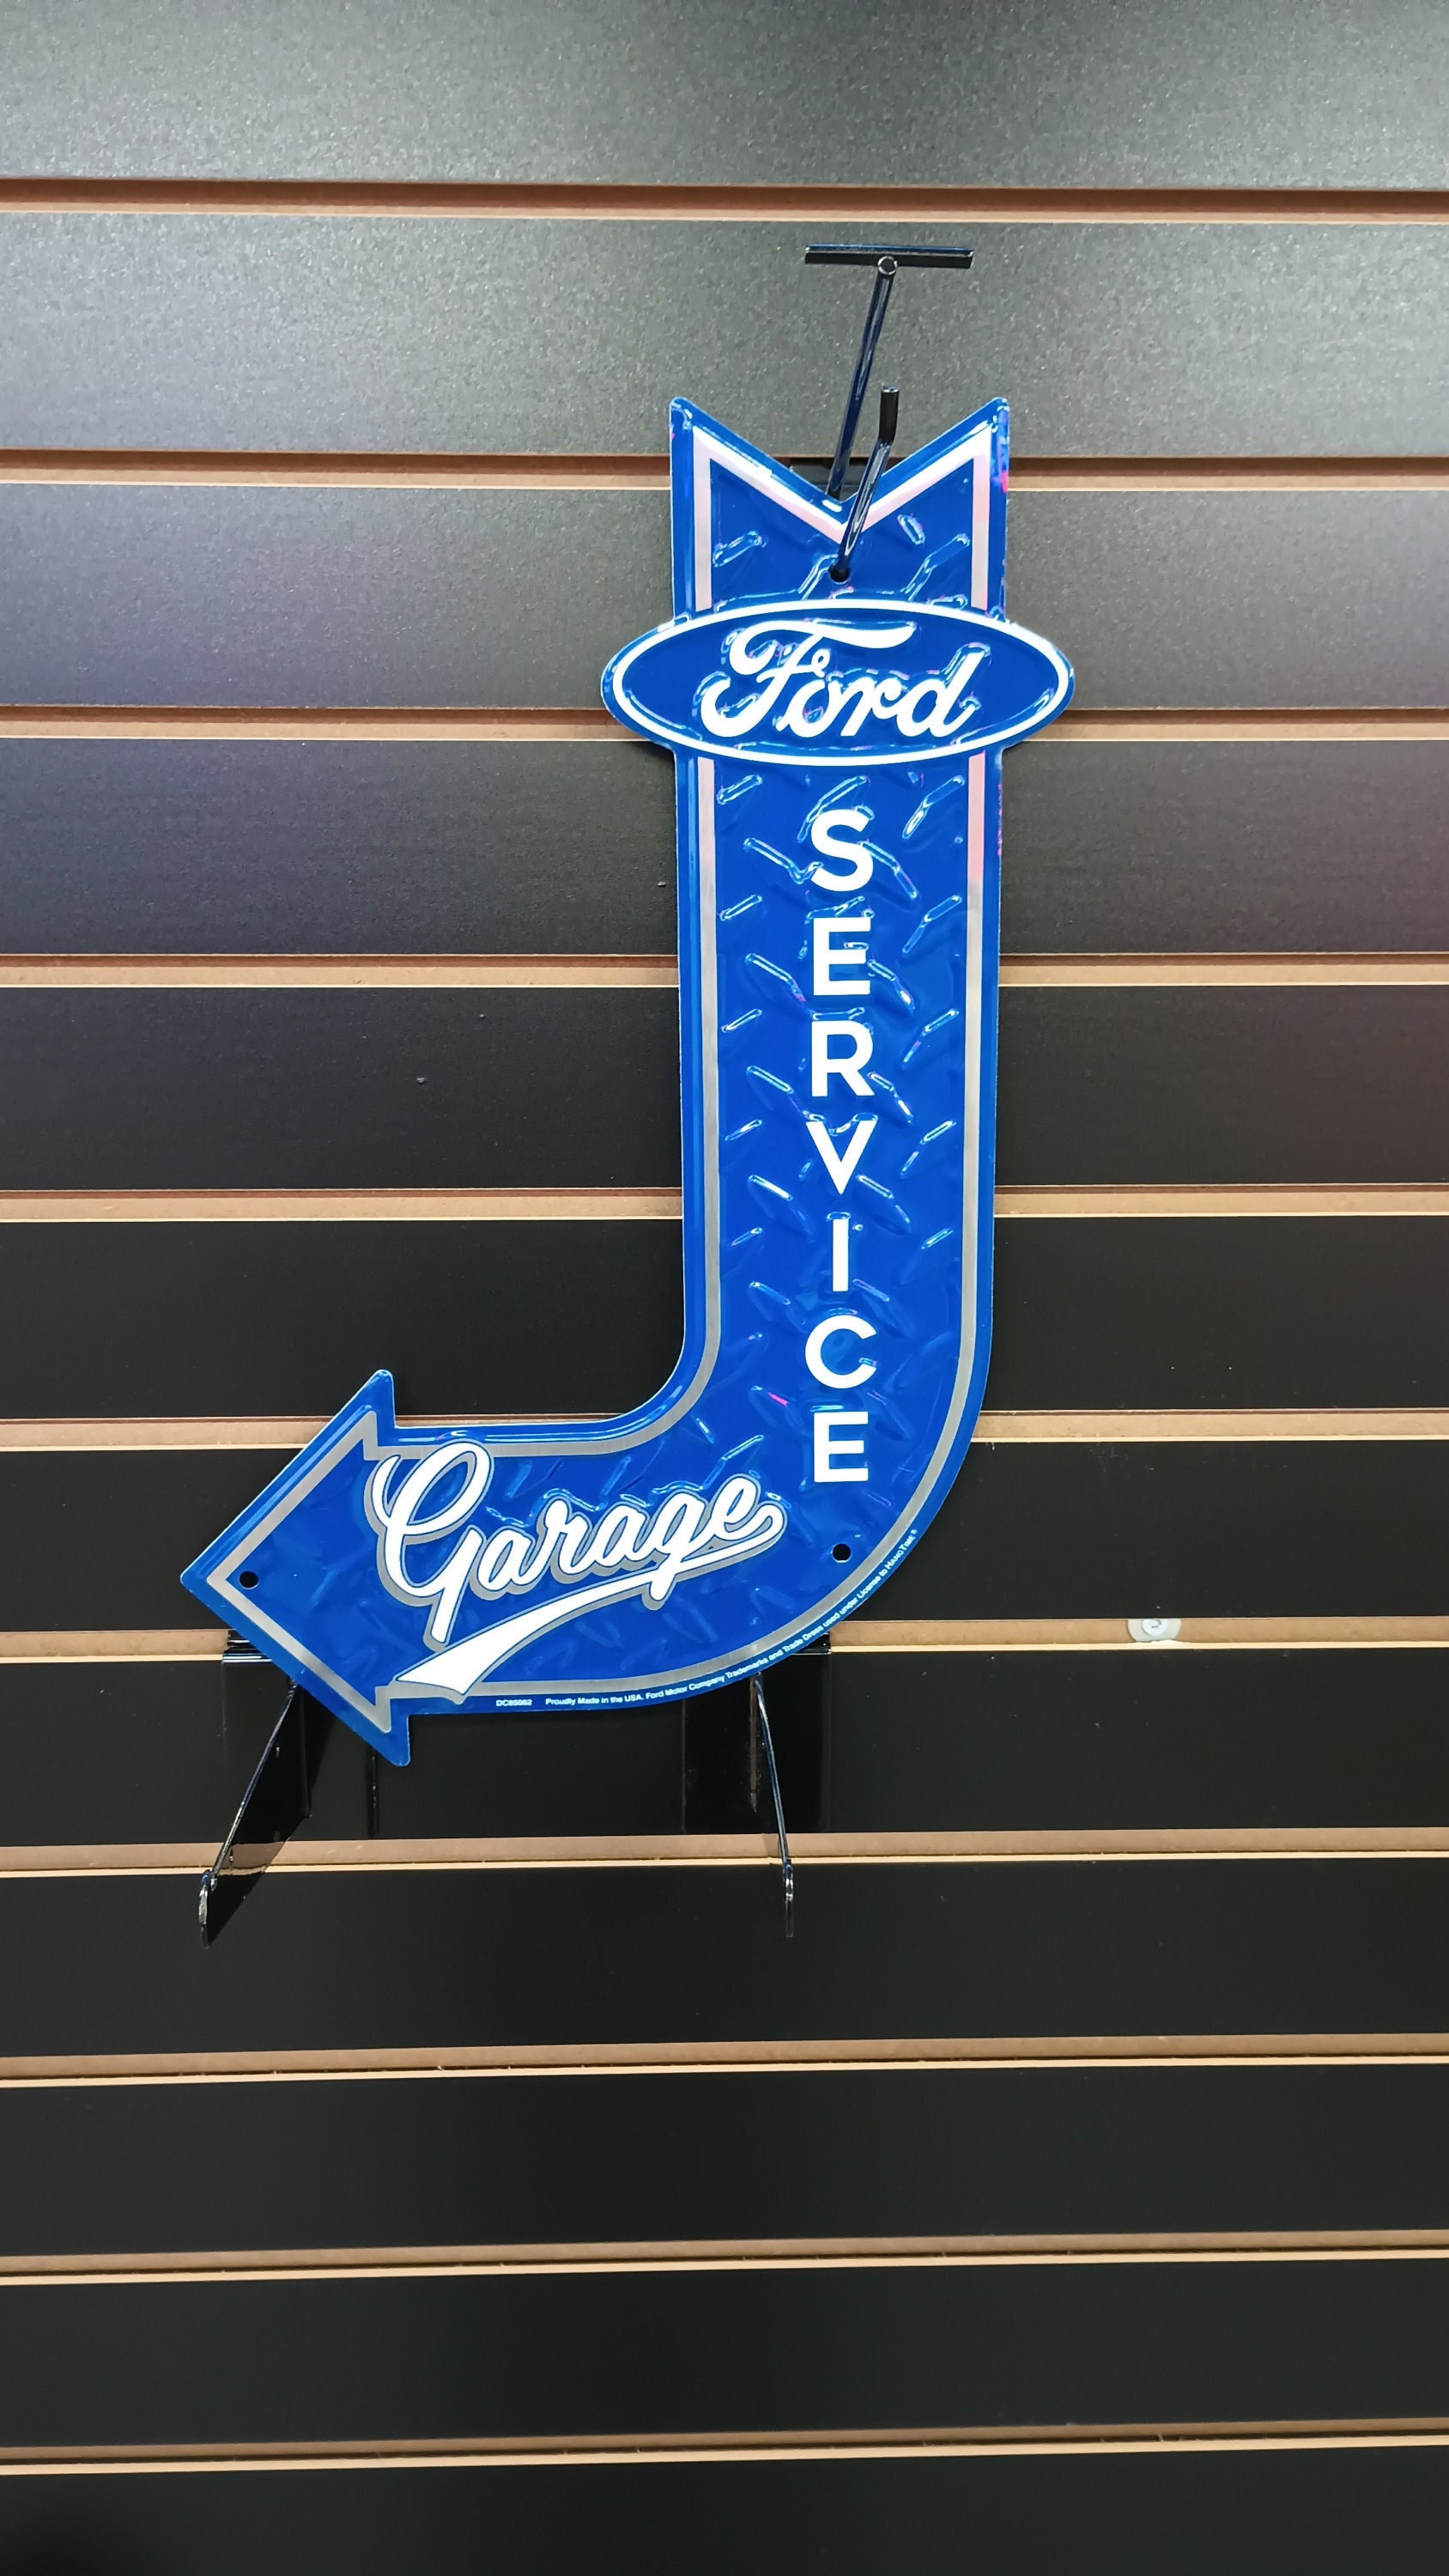 Ford Service Garage Bent Arrow Sign Ford Signs Gifts for Dad Gifts for Men  Automobilia Metal Garage Signs for Men Man Cave Wall Decor 